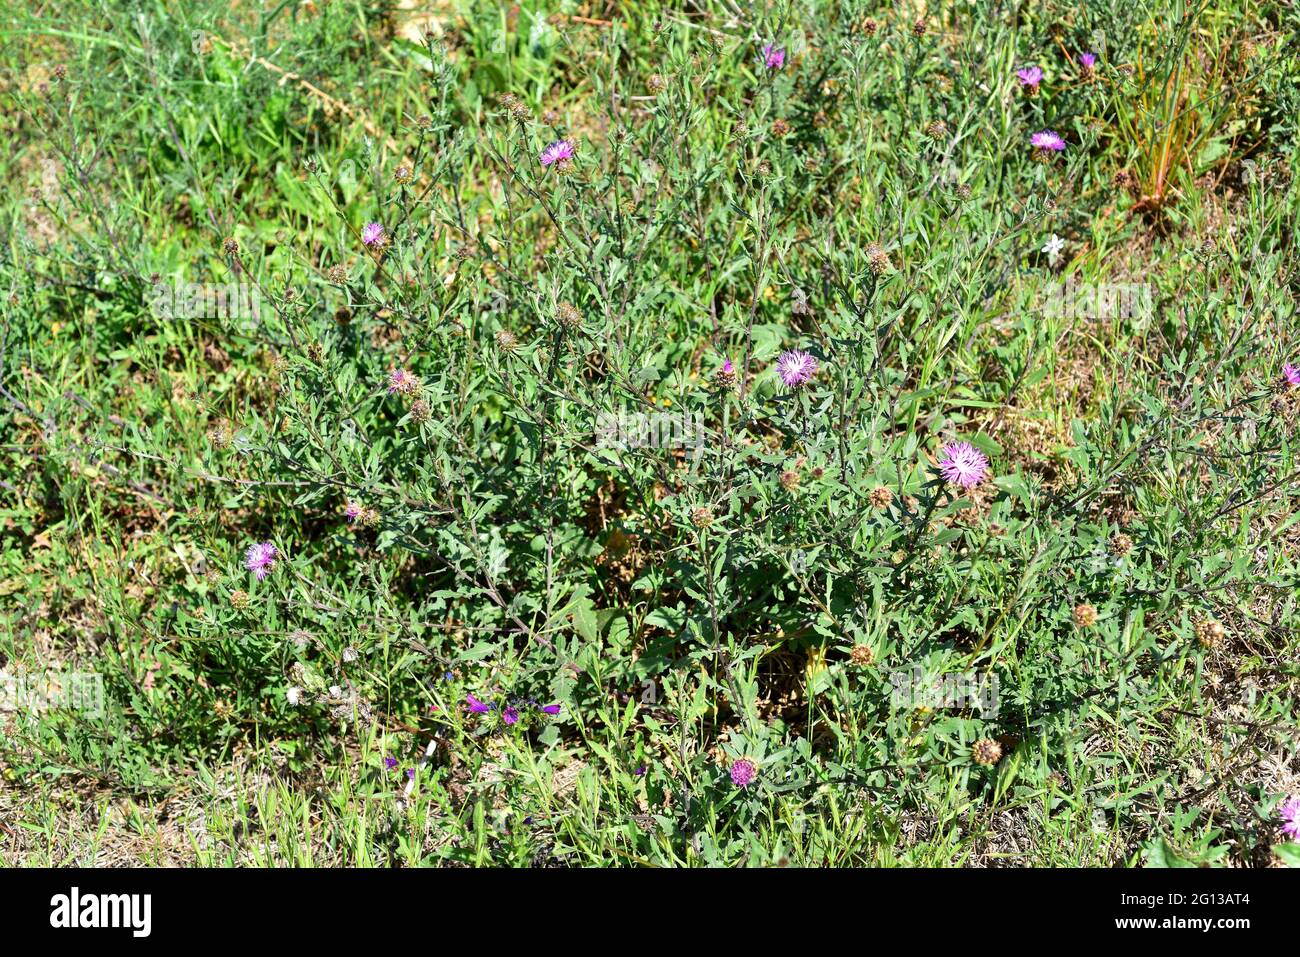 Greater knapweed (Centaurea scabiosa) is a perennial plant native to Europe. This photo was taken in Montjuic, Barcelona, Catalonia, Spain. Stock Photo